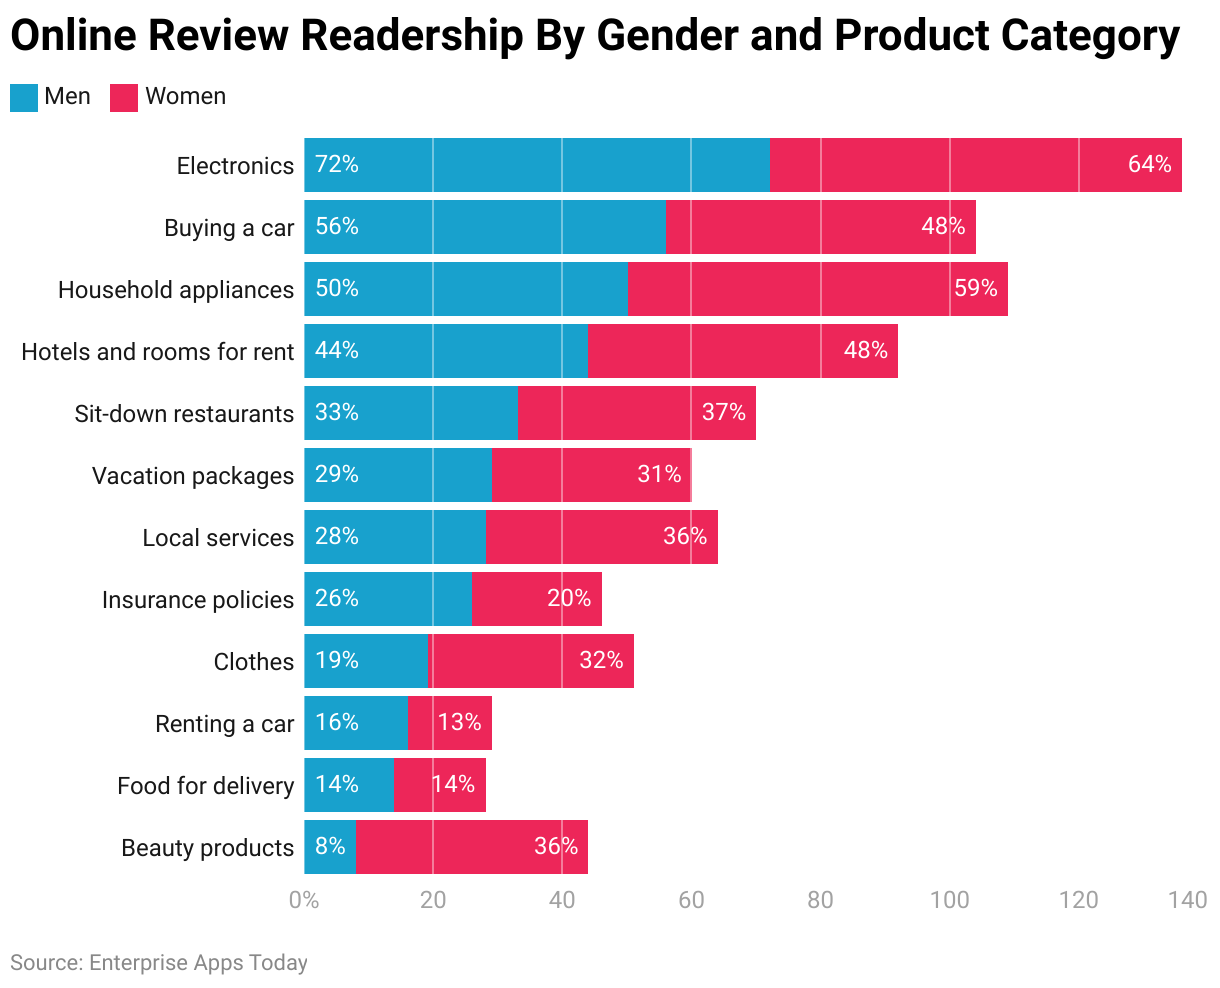 Online Review Readership By Gender and Product Category 